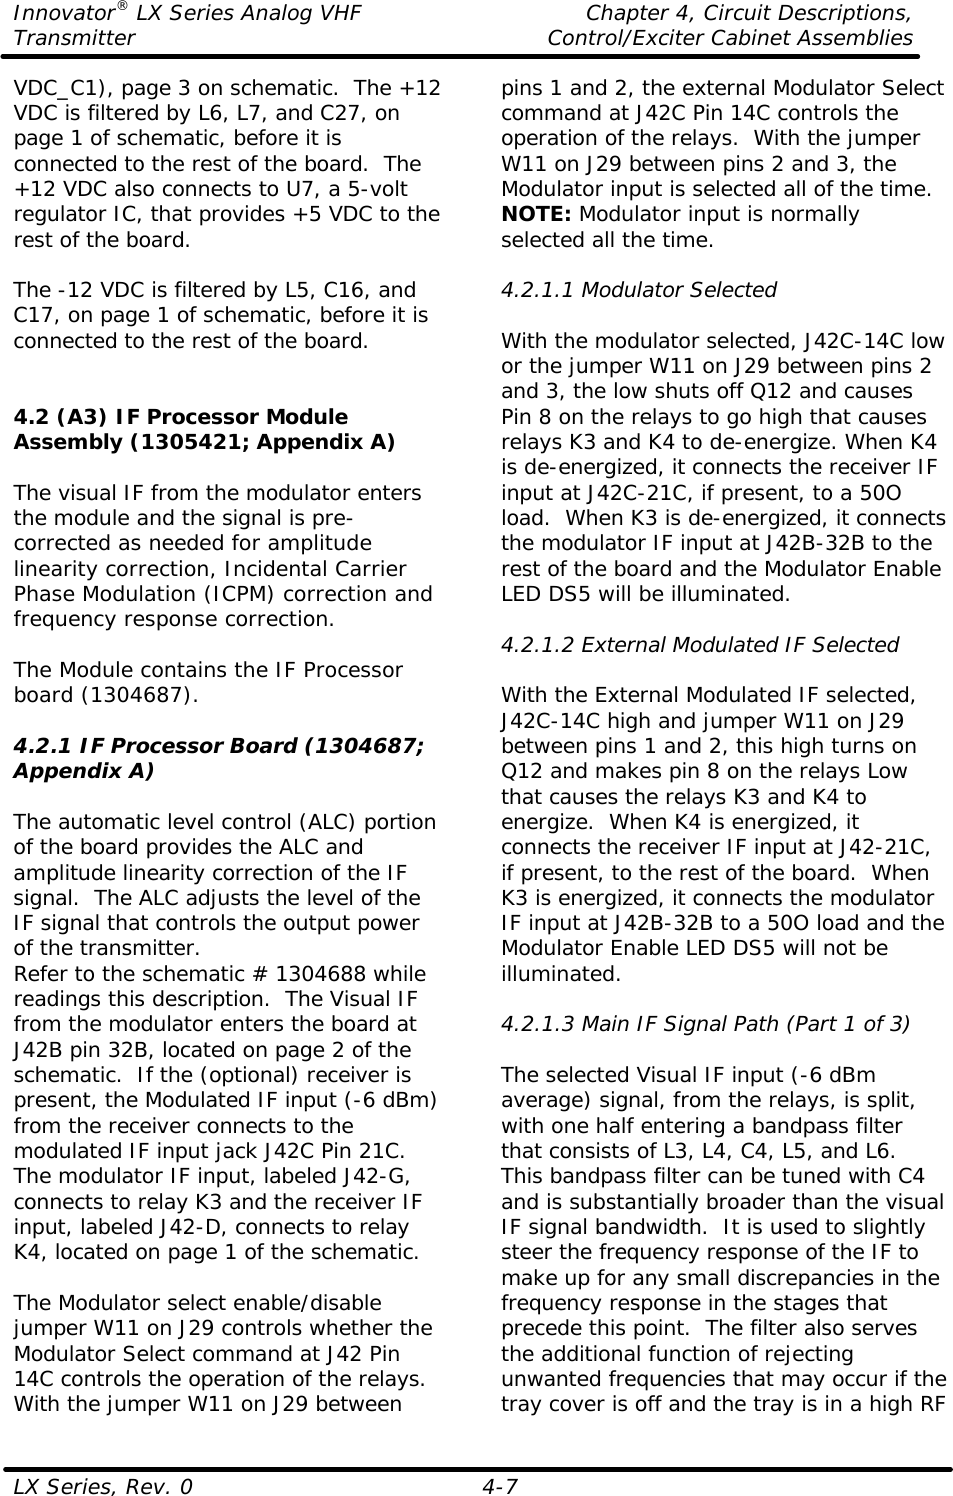 Innovator® LX Series Analog VHF    Chapter 4, Circuit Descriptions, Transmitter Control/Exciter Cabinet Assemblies  LX Series, Rev. 0    4-7 VDC_C1), page 3 on schematic.  The +12 VDC is filtered by L6, L7, and C27, on page 1 of schematic, before it is connected to the rest of the board.  The +12 VDC also connects to U7, a 5-volt regulator IC, that provides +5 VDC to the rest of the board.  The -12 VDC is filtered by L5, C16, and C17, on page 1 of schematic, before it is connected to the rest of the board.    4.2 (A3) IF Processor Module Assembly (1305421; Appendix A)  The visual IF from the modulator enters the module and the signal is pre-corrected as needed for amplitude linearity correction, Incidental Carrier Phase Modulation (ICPM) correction and frequency response correction.  The Module contains the IF Processor board (1304687).  4.2.1 IF Processor Board (1304687; Appendix A)  The automatic level control (ALC) portion of the board provides the ALC and amplitude linearity correction of the IF signal.  The ALC adjusts the level of the IF signal that controls the output power of the transmitter. Refer to the schematic # 1304688 while readings this description.  The Visual IF from the modulator enters the board at J42B pin 32B, located on page 2 of the schematic.  If the (optional) receiver is present, the Modulated IF input (-6 dBm) from the receiver connects to the modulated IF input jack J42C Pin 21C.  The modulator IF input, labeled J42-G, connects to relay K3 and the receiver IF input, labeled J42-D, connects to relay K4, located on page 1 of the schematic.  The Modulator select enable/disable jumper W11 on J29 controls whether the Modulator Select command at J42 Pin 14C controls the operation of the relays.  With the jumper W11 on J29 between pins 1 and 2, the external Modulator Select command at J42C Pin 14C controls the operation of the relays.  With the jumper W11 on J29 between pins 2 and 3, the Modulator input is selected all of the time. NOTE: Modulator input is normally selected all the time.  4.2.1.1 Modulator Selected  With the modulator selected, J42C-14C low or the jumper W11 on J29 between pins 2 and 3, the low shuts off Q12 and causes Pin 8 on the relays to go high that causes relays K3 and K4 to de-energize. When K4 is de-energized, it connects the receiver IF input at J42C-21C, if present, to a 50O load.  When K3 is de-energized, it connects the modulator IF input at J42B-32B to the rest of the board and the Modulator Enable LED DS5 will be illuminated.  4.2.1.2 External Modulated IF Selected  With the External Modulated IF selected, J42C-14C high and jumper W11 on J29 between pins 1 and 2, this high turns on Q12 and makes pin 8 on the relays Low that causes the relays K3 and K4 to energize.  When K4 is energized, it connects the receiver IF input at J42-21C, if present, to the rest of the board.  When K3 is energized, it connects the modulator IF input at J42B-32B to a 50O load and the Modulator Enable LED DS5 will not be illuminated.  4.2.1.3 Main IF Signal Path (Part 1 of 3)  The selected Visual IF input (-6 dBm average) signal, from the relays, is split, with one half entering a bandpass filter that consists of L3, L4, C4, L5, and L6.  This bandpass filter can be tuned with C4 and is substantially broader than the visual IF signal bandwidth.  It is used to slightly steer the frequency response of the IF to make up for any small discrepancies in the frequency response in the stages that precede this point.  The filter also serves the additional function of rejecting unwanted frequencies that may occur if the tray cover is off and the tray is in a high RF 